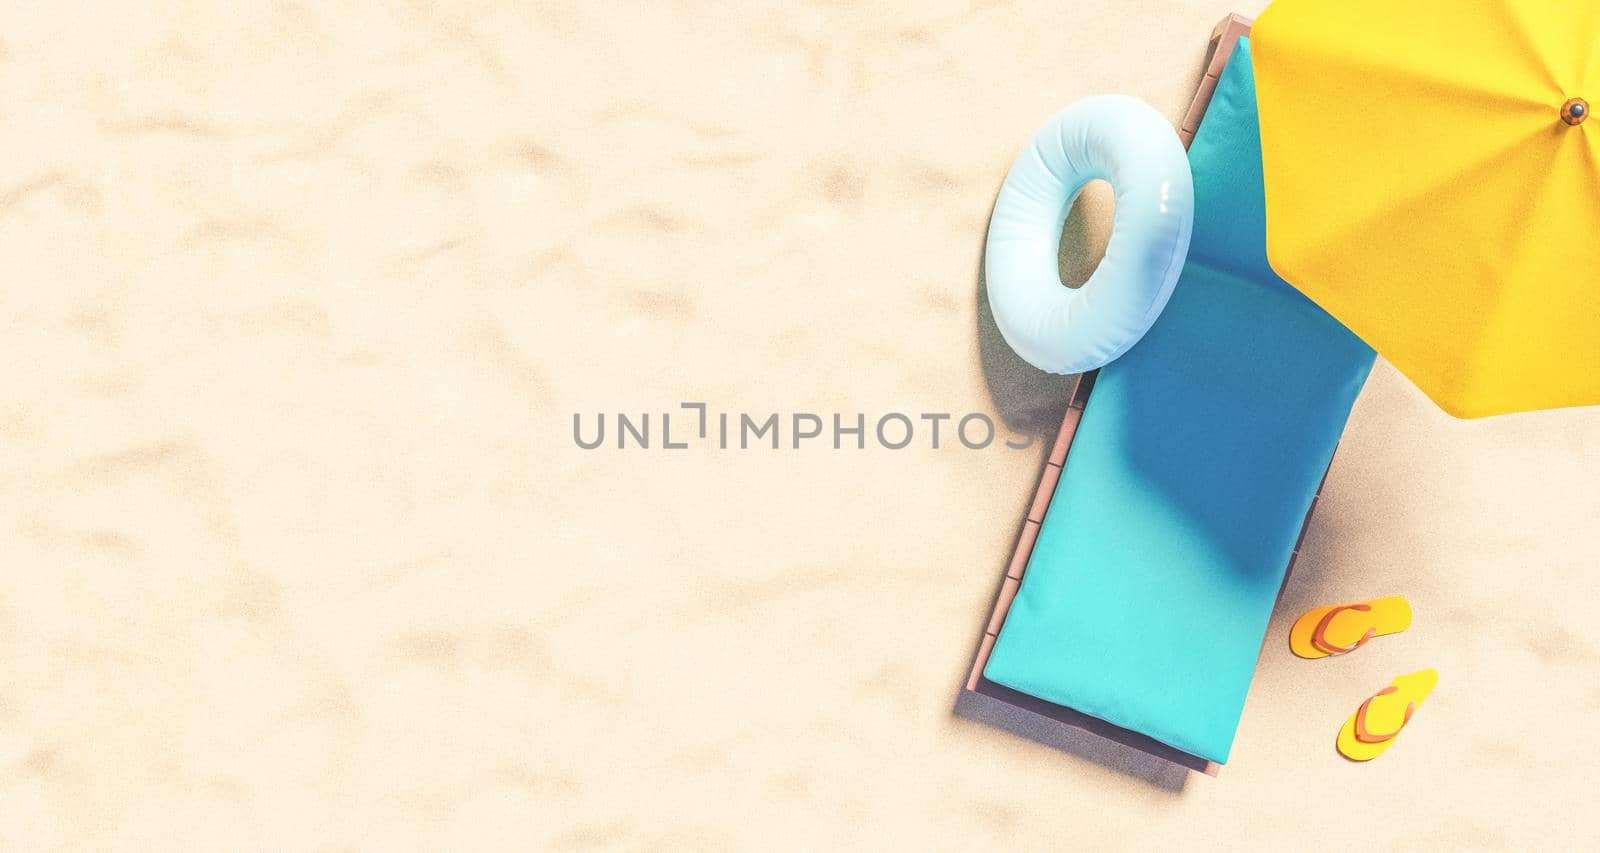 Top view 3D rendering of wooden sunbed with blue mattress and yellow umbrella placed on sandy beach near swim ring and flip flops on sunny day